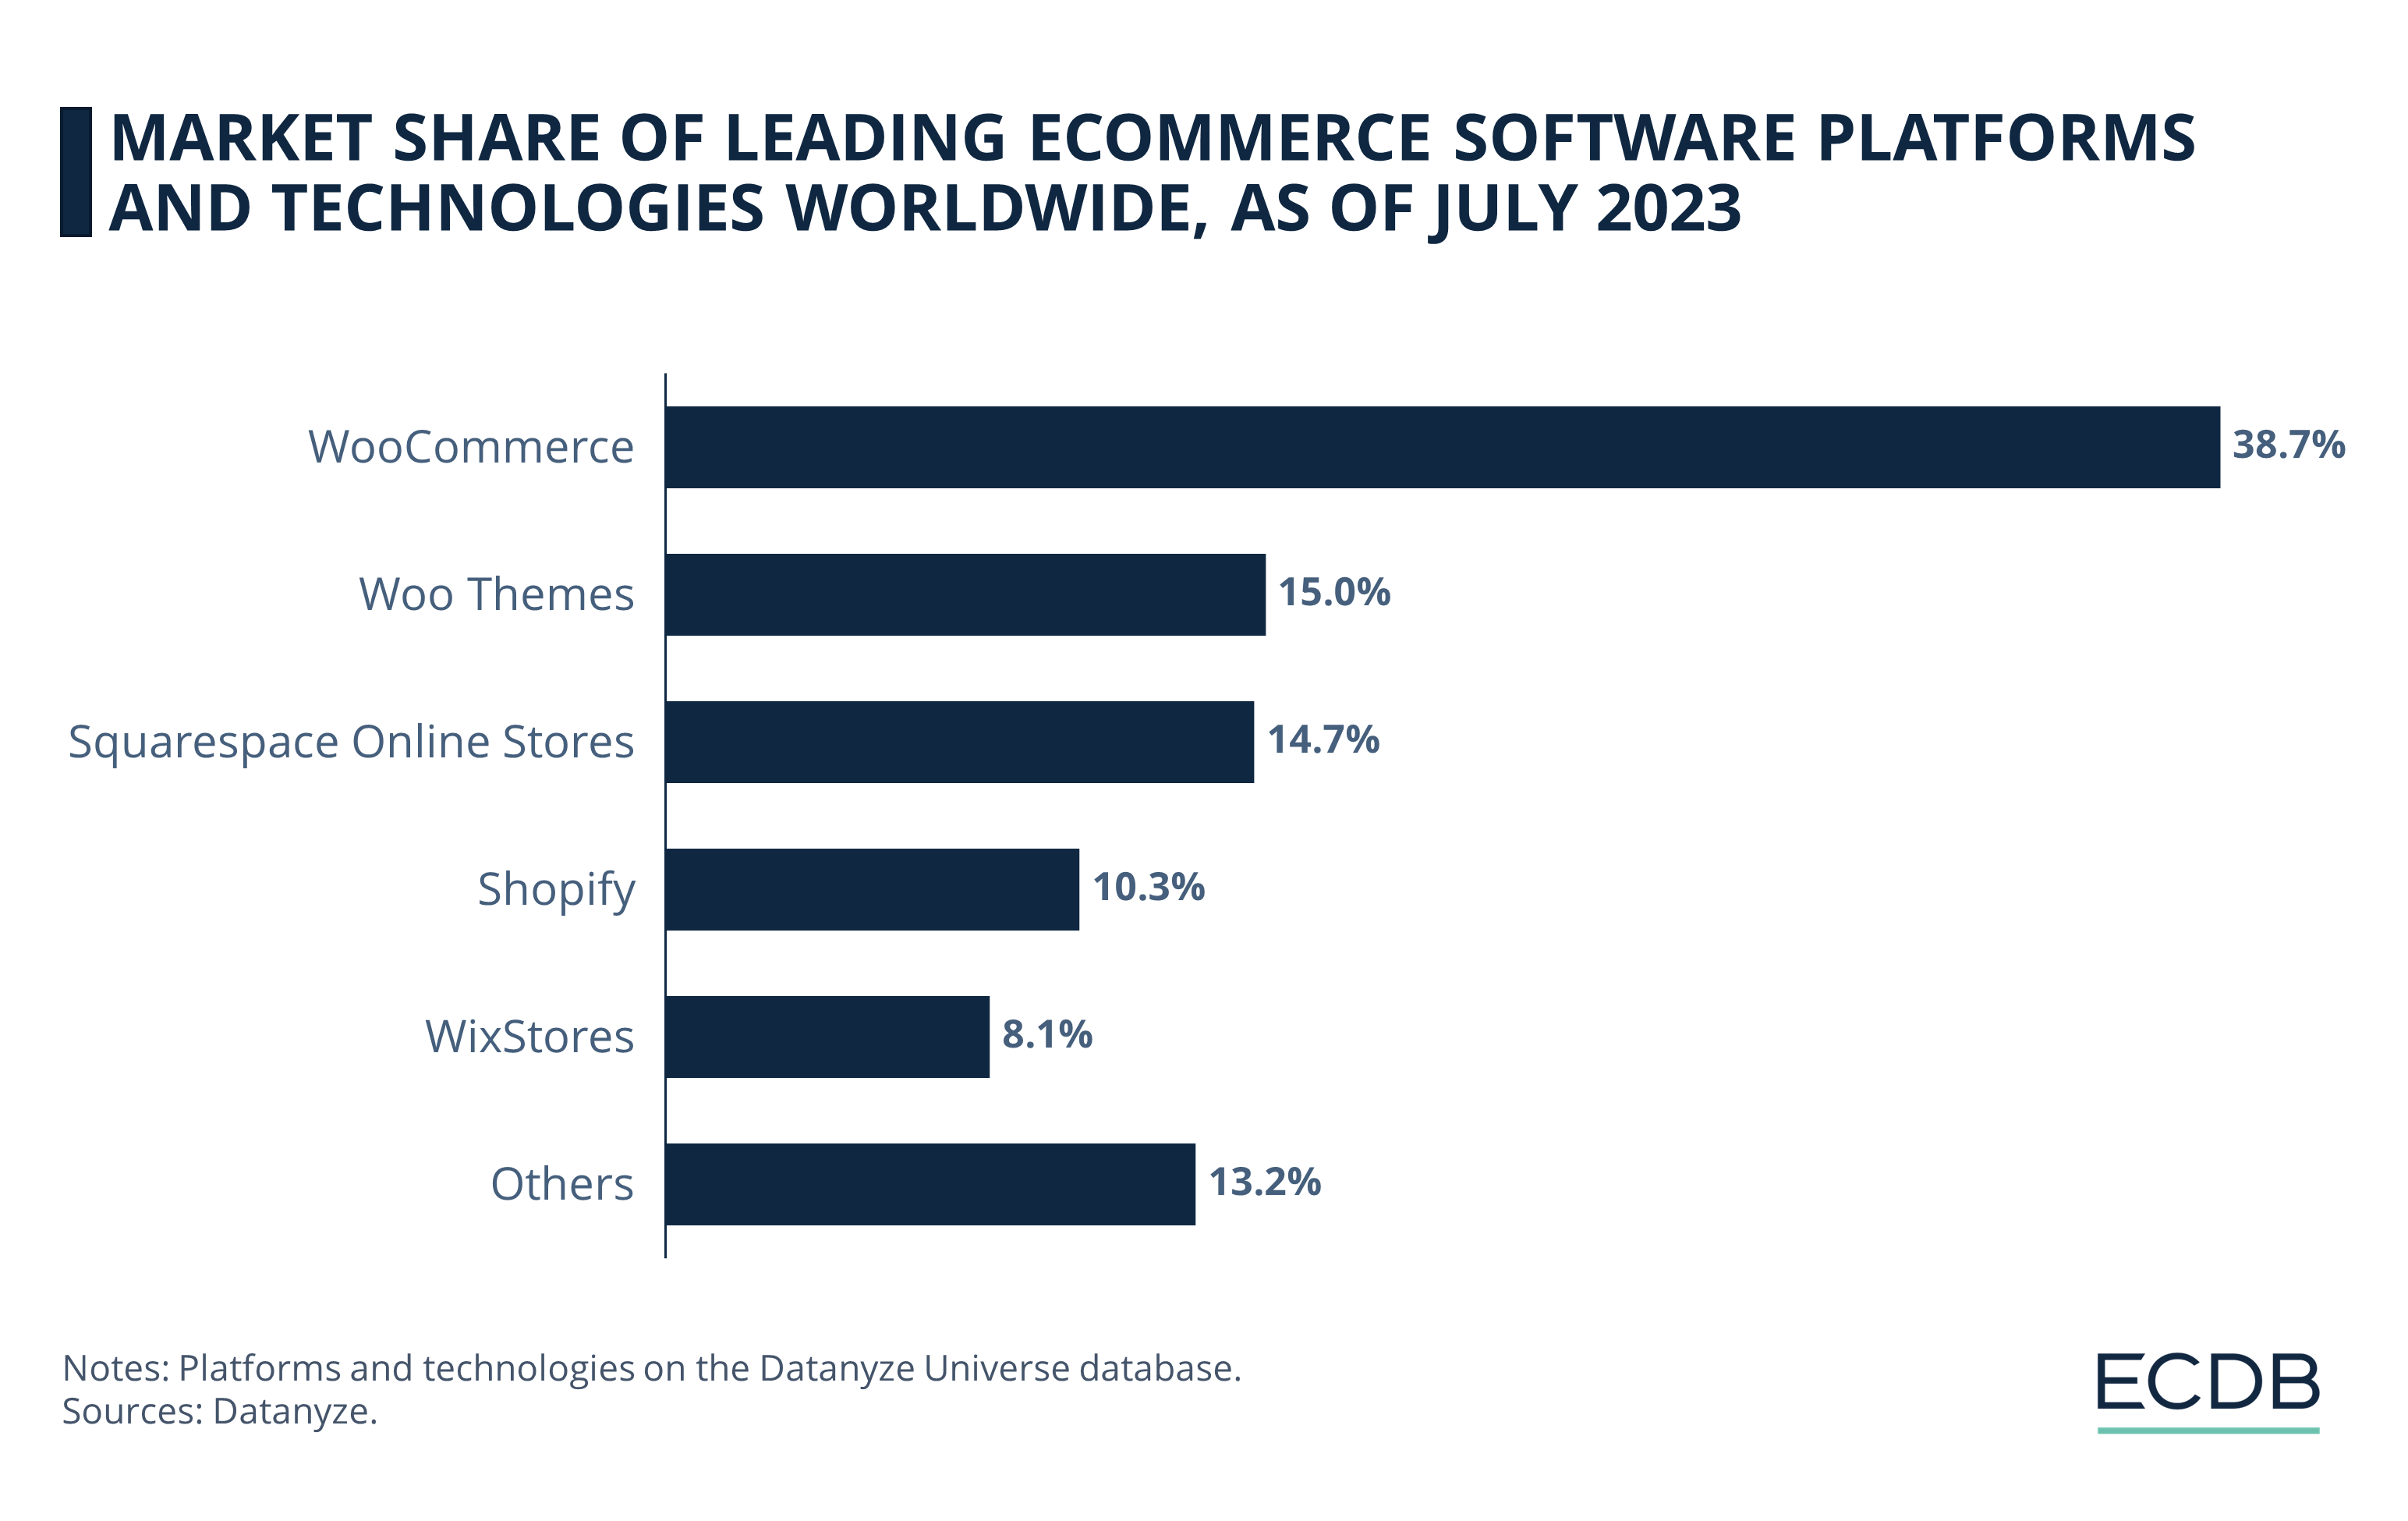 Market Share of Leading eCommerce Software Platforms and Technologies Worldwide, as of July 2023